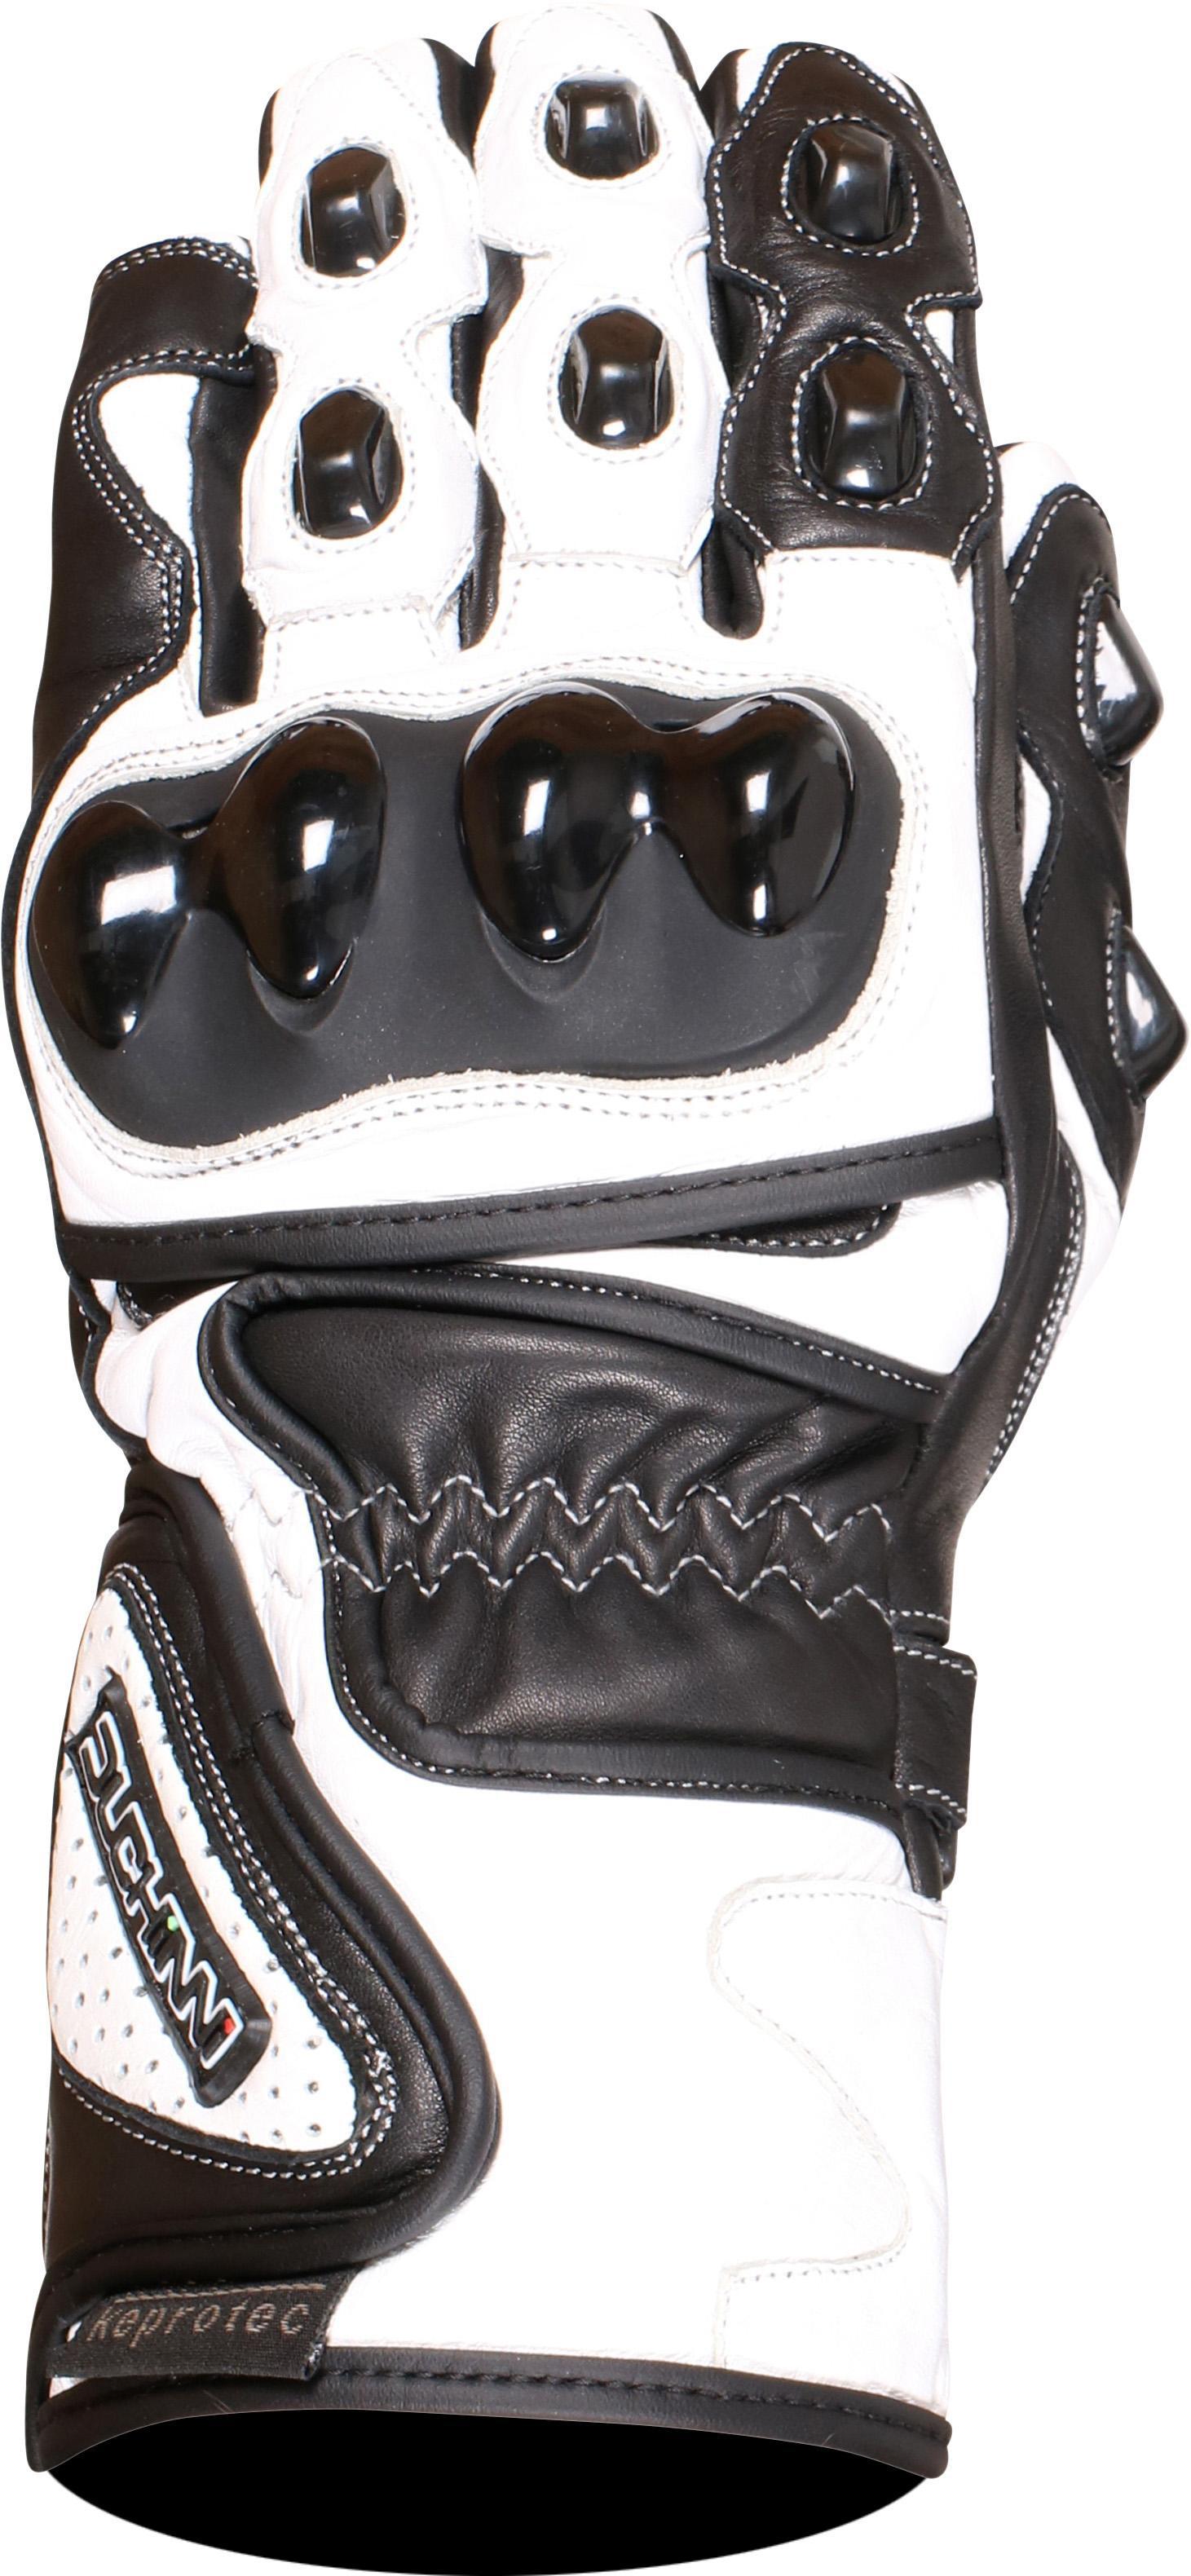 Duchinni Dr1 Motorcycle Gloves - Black And White, 3Xl